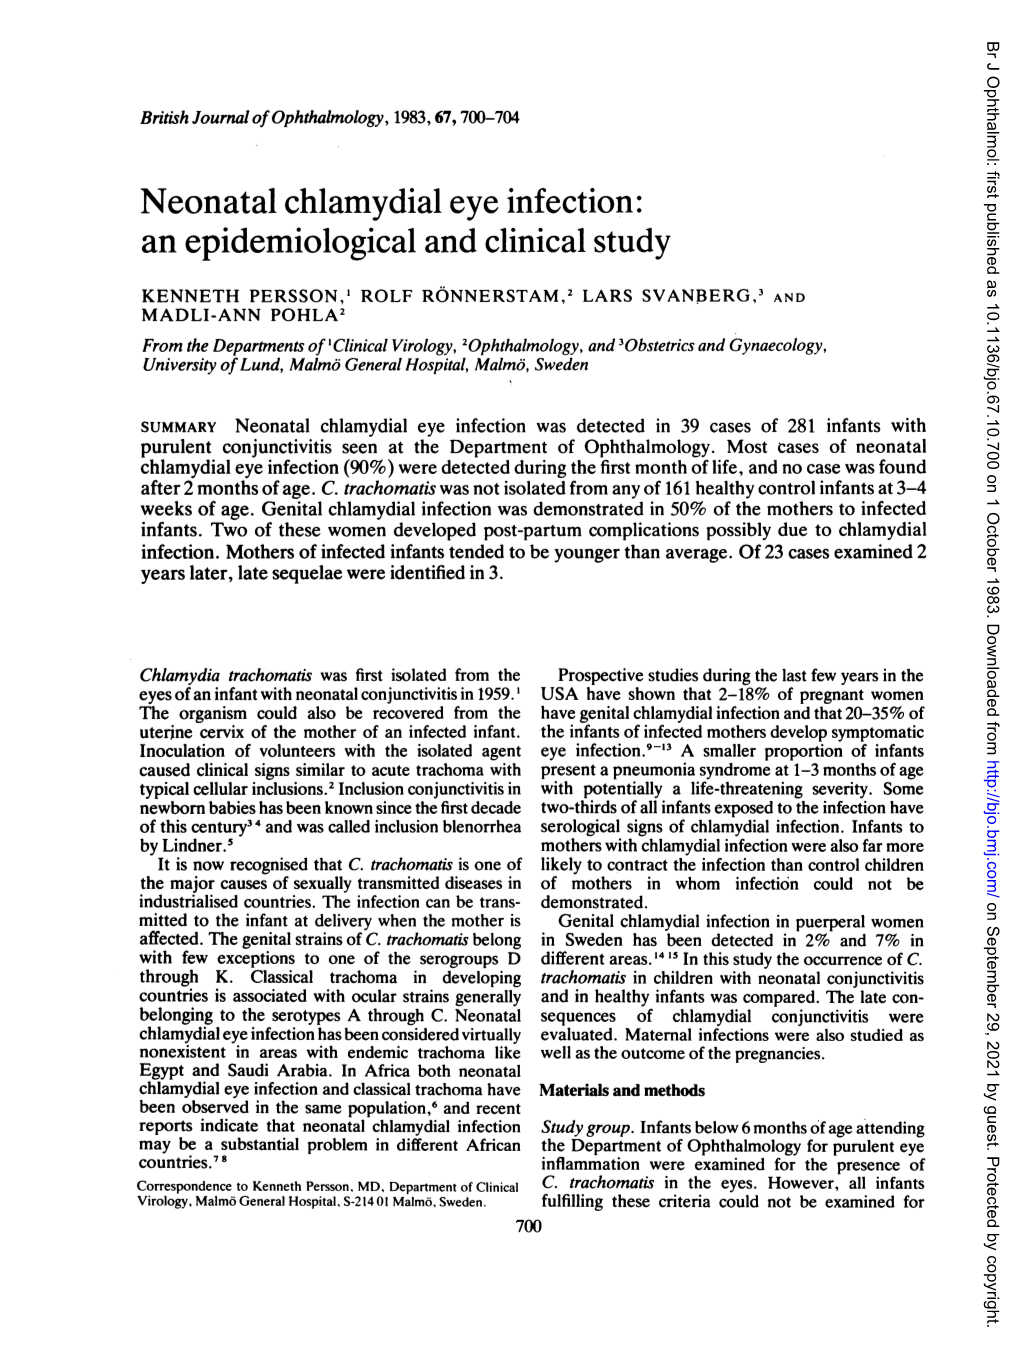 Neonatal Chlamydial Eye Infection: an Epidemiological and Clinical Study